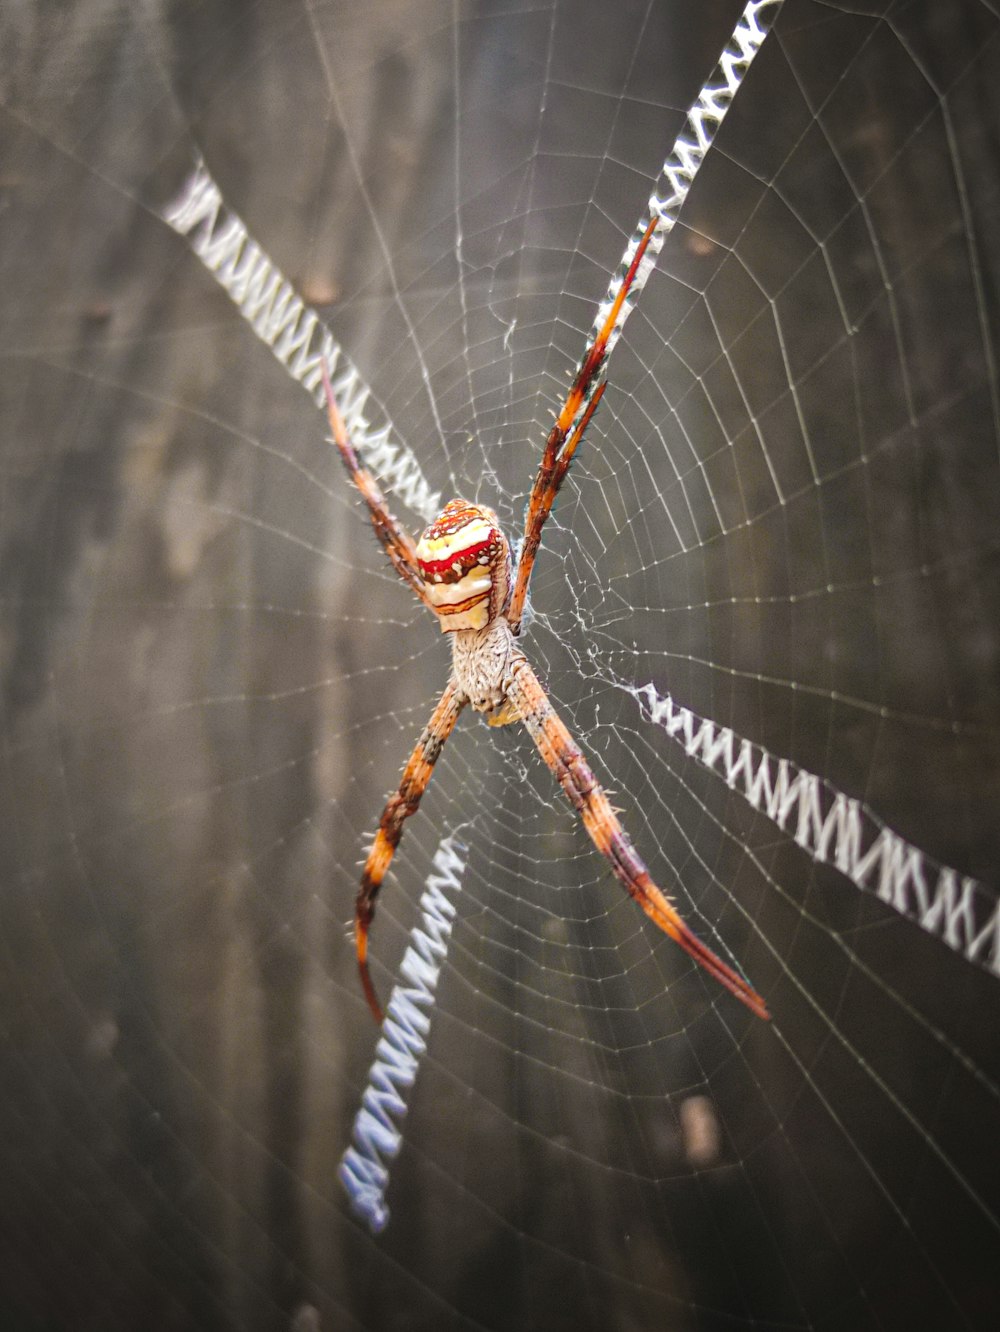 brown and black spider on spider web in close up photography during daytime